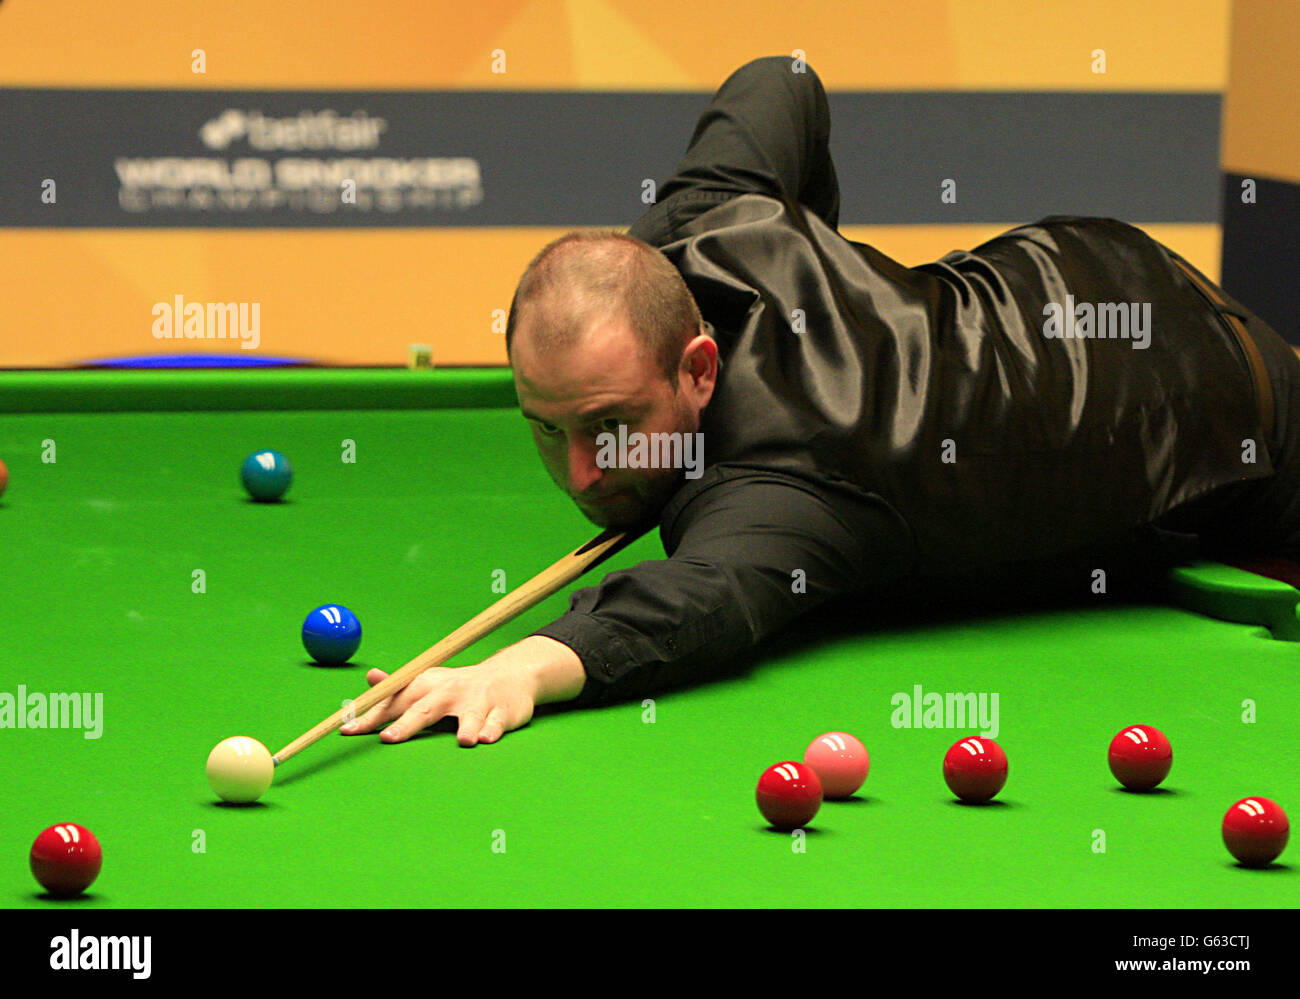 Matthew Selt in action during his first round match against Mark Selby during the Betfair World Championships at the Crucible, Sheffield. Stock Photo